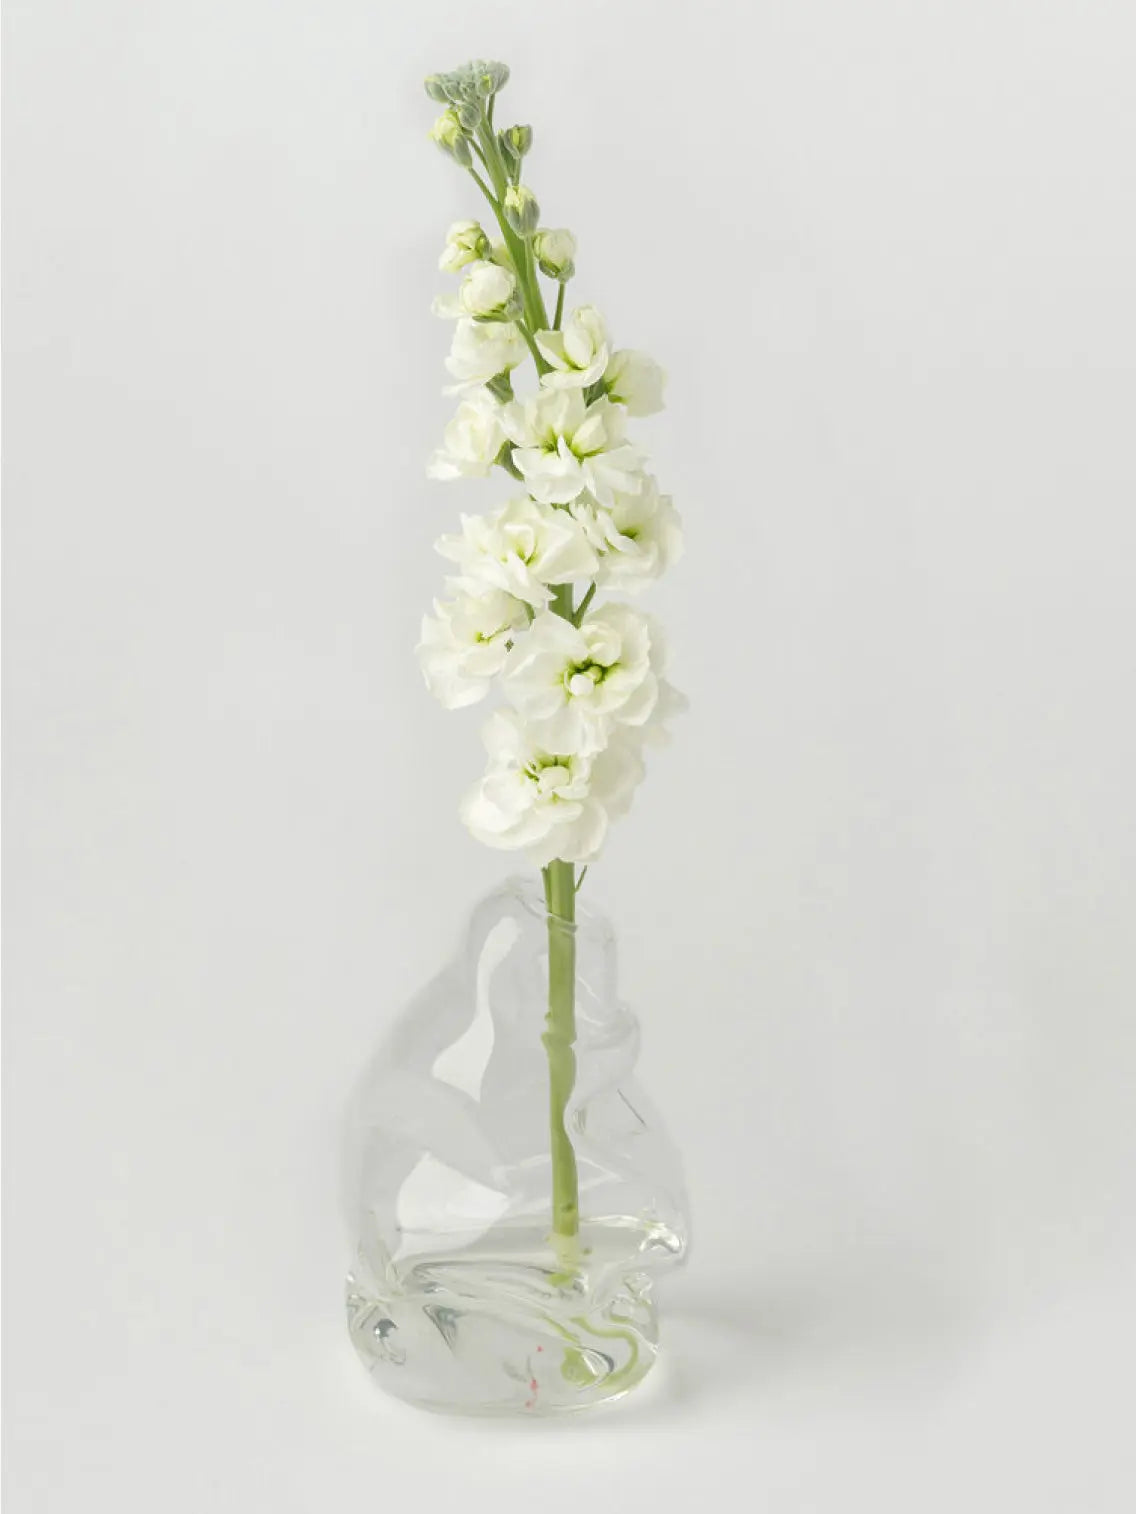 A small, clear glass vase with a slightly tilted, asymmetrical shape is shown against a plain white background. The vase has a smooth, modern design and is empty inside—a perfect piece you might find at Bassalstore in Barcelona. This is the Ben Jor Vase Clear by Nathalie Schreckenberg.